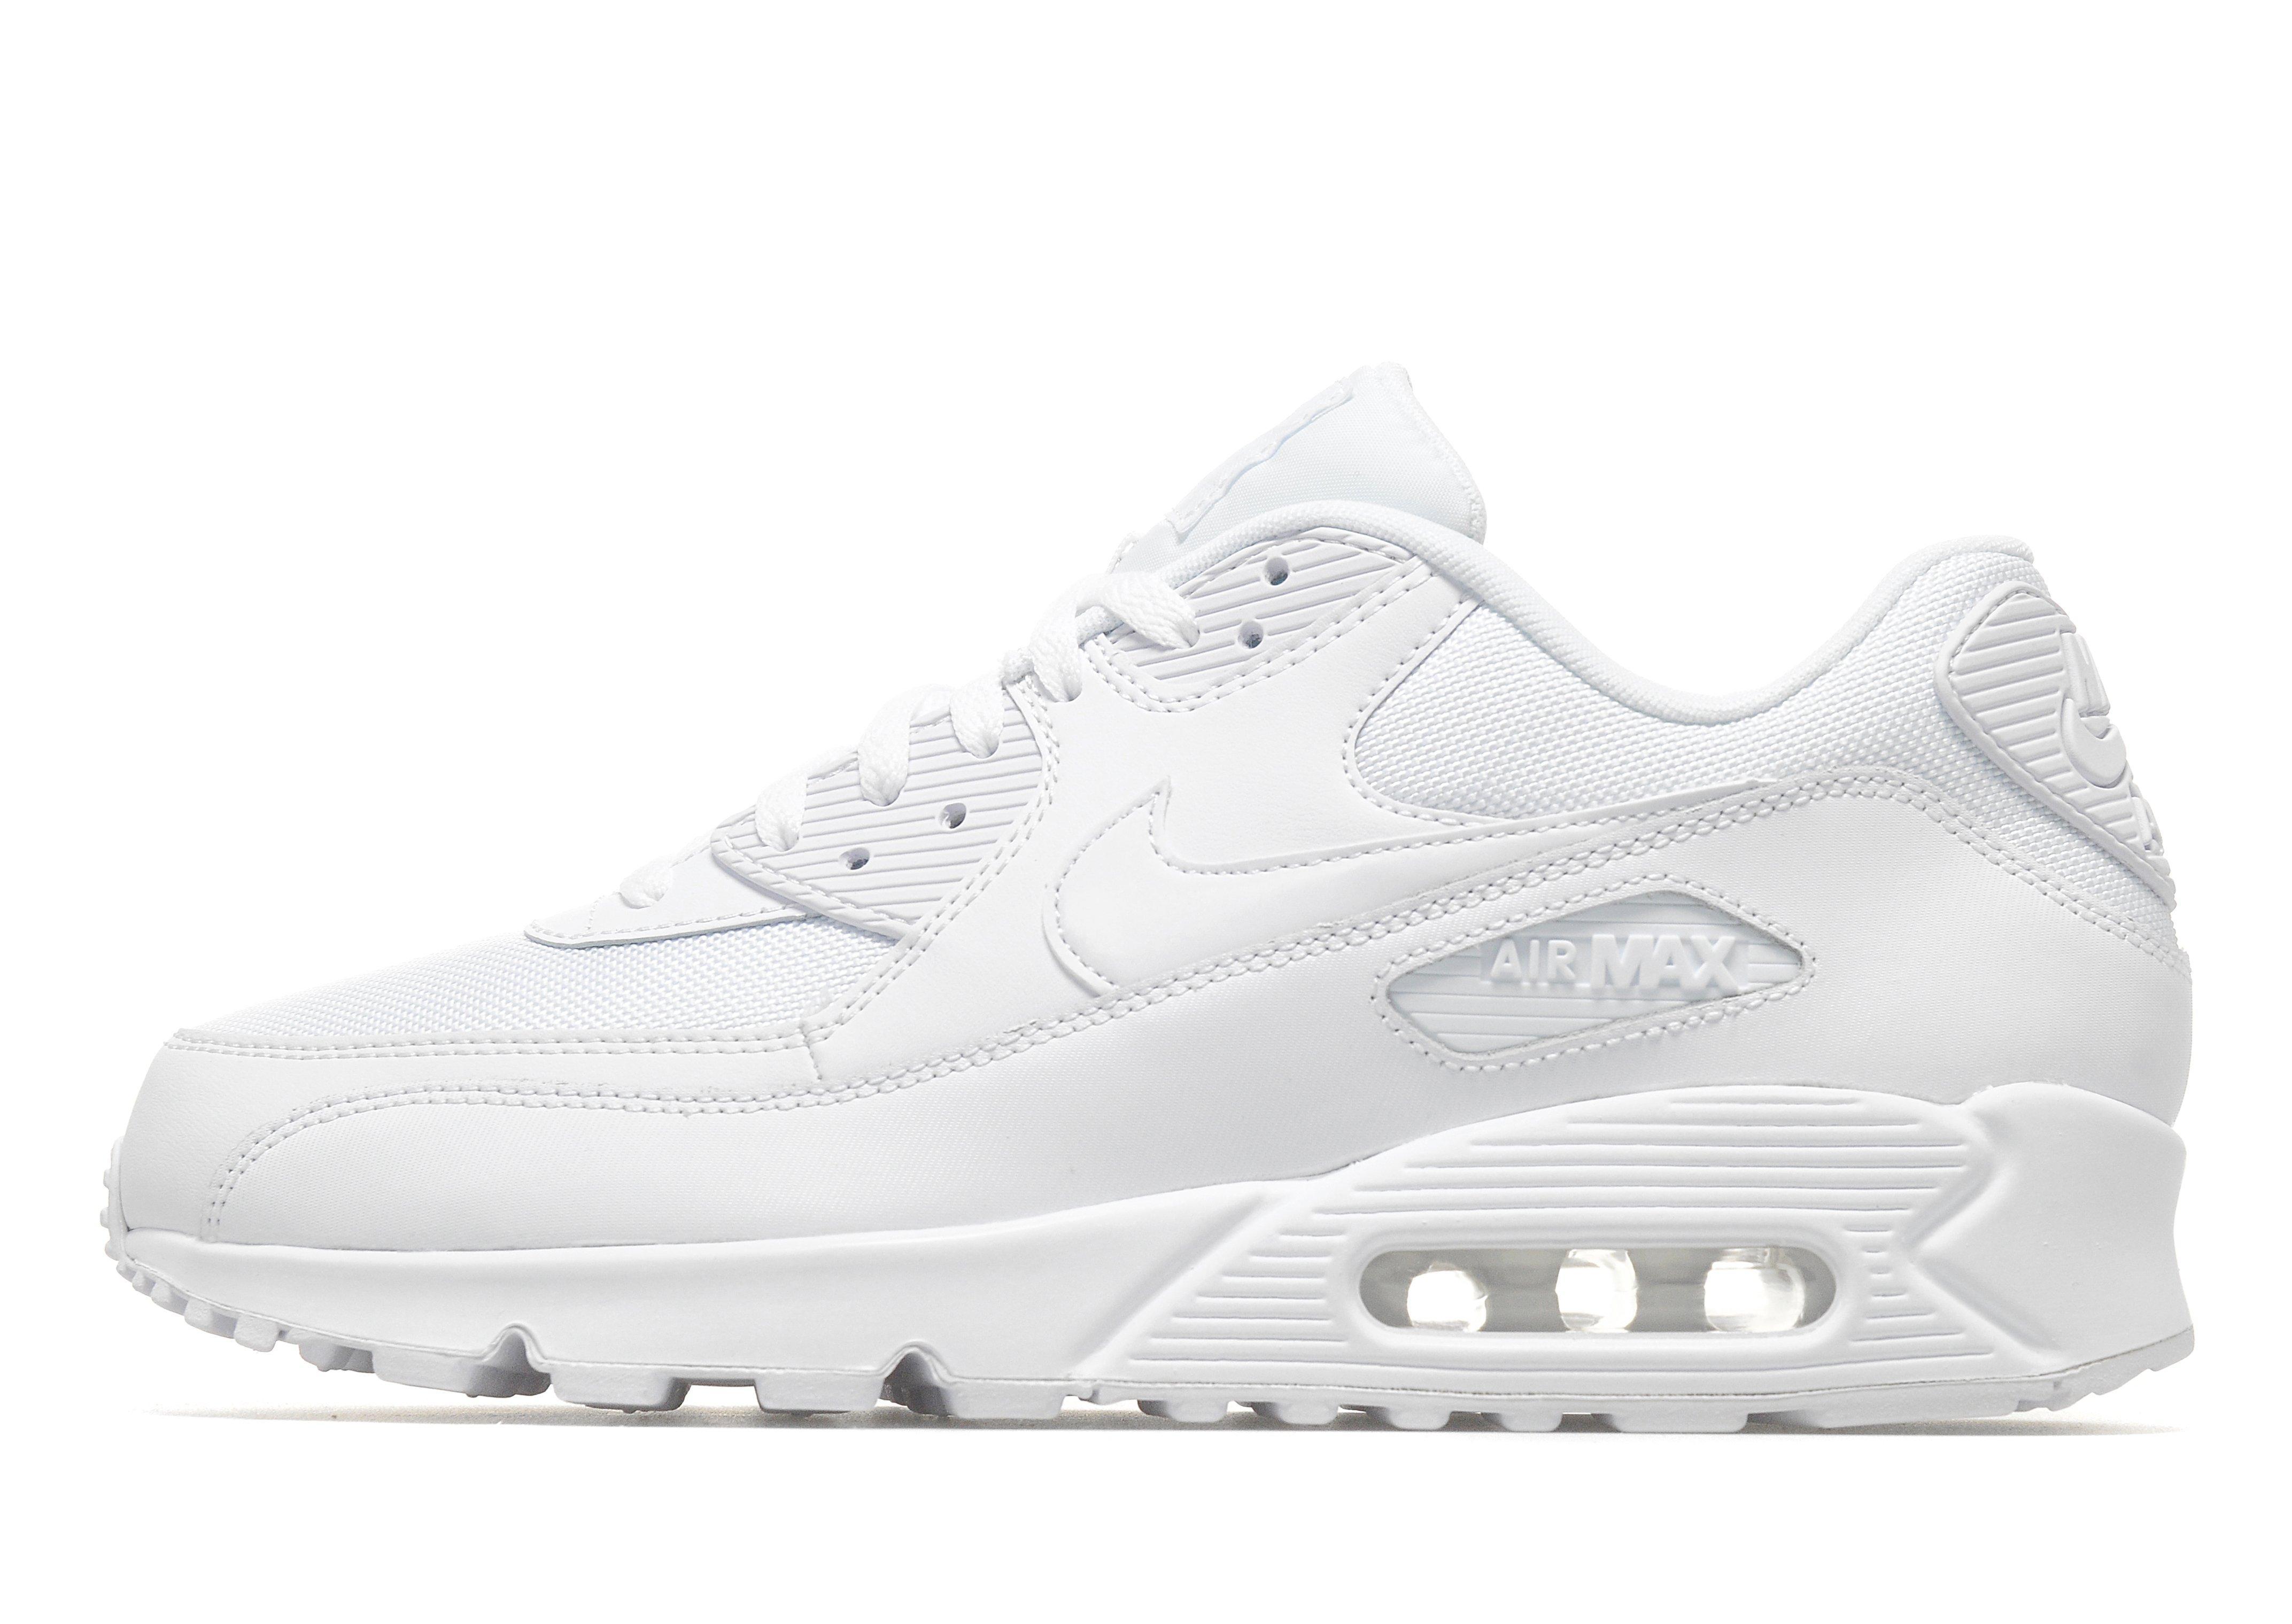 Lyst - Nike Air Max 90 in White